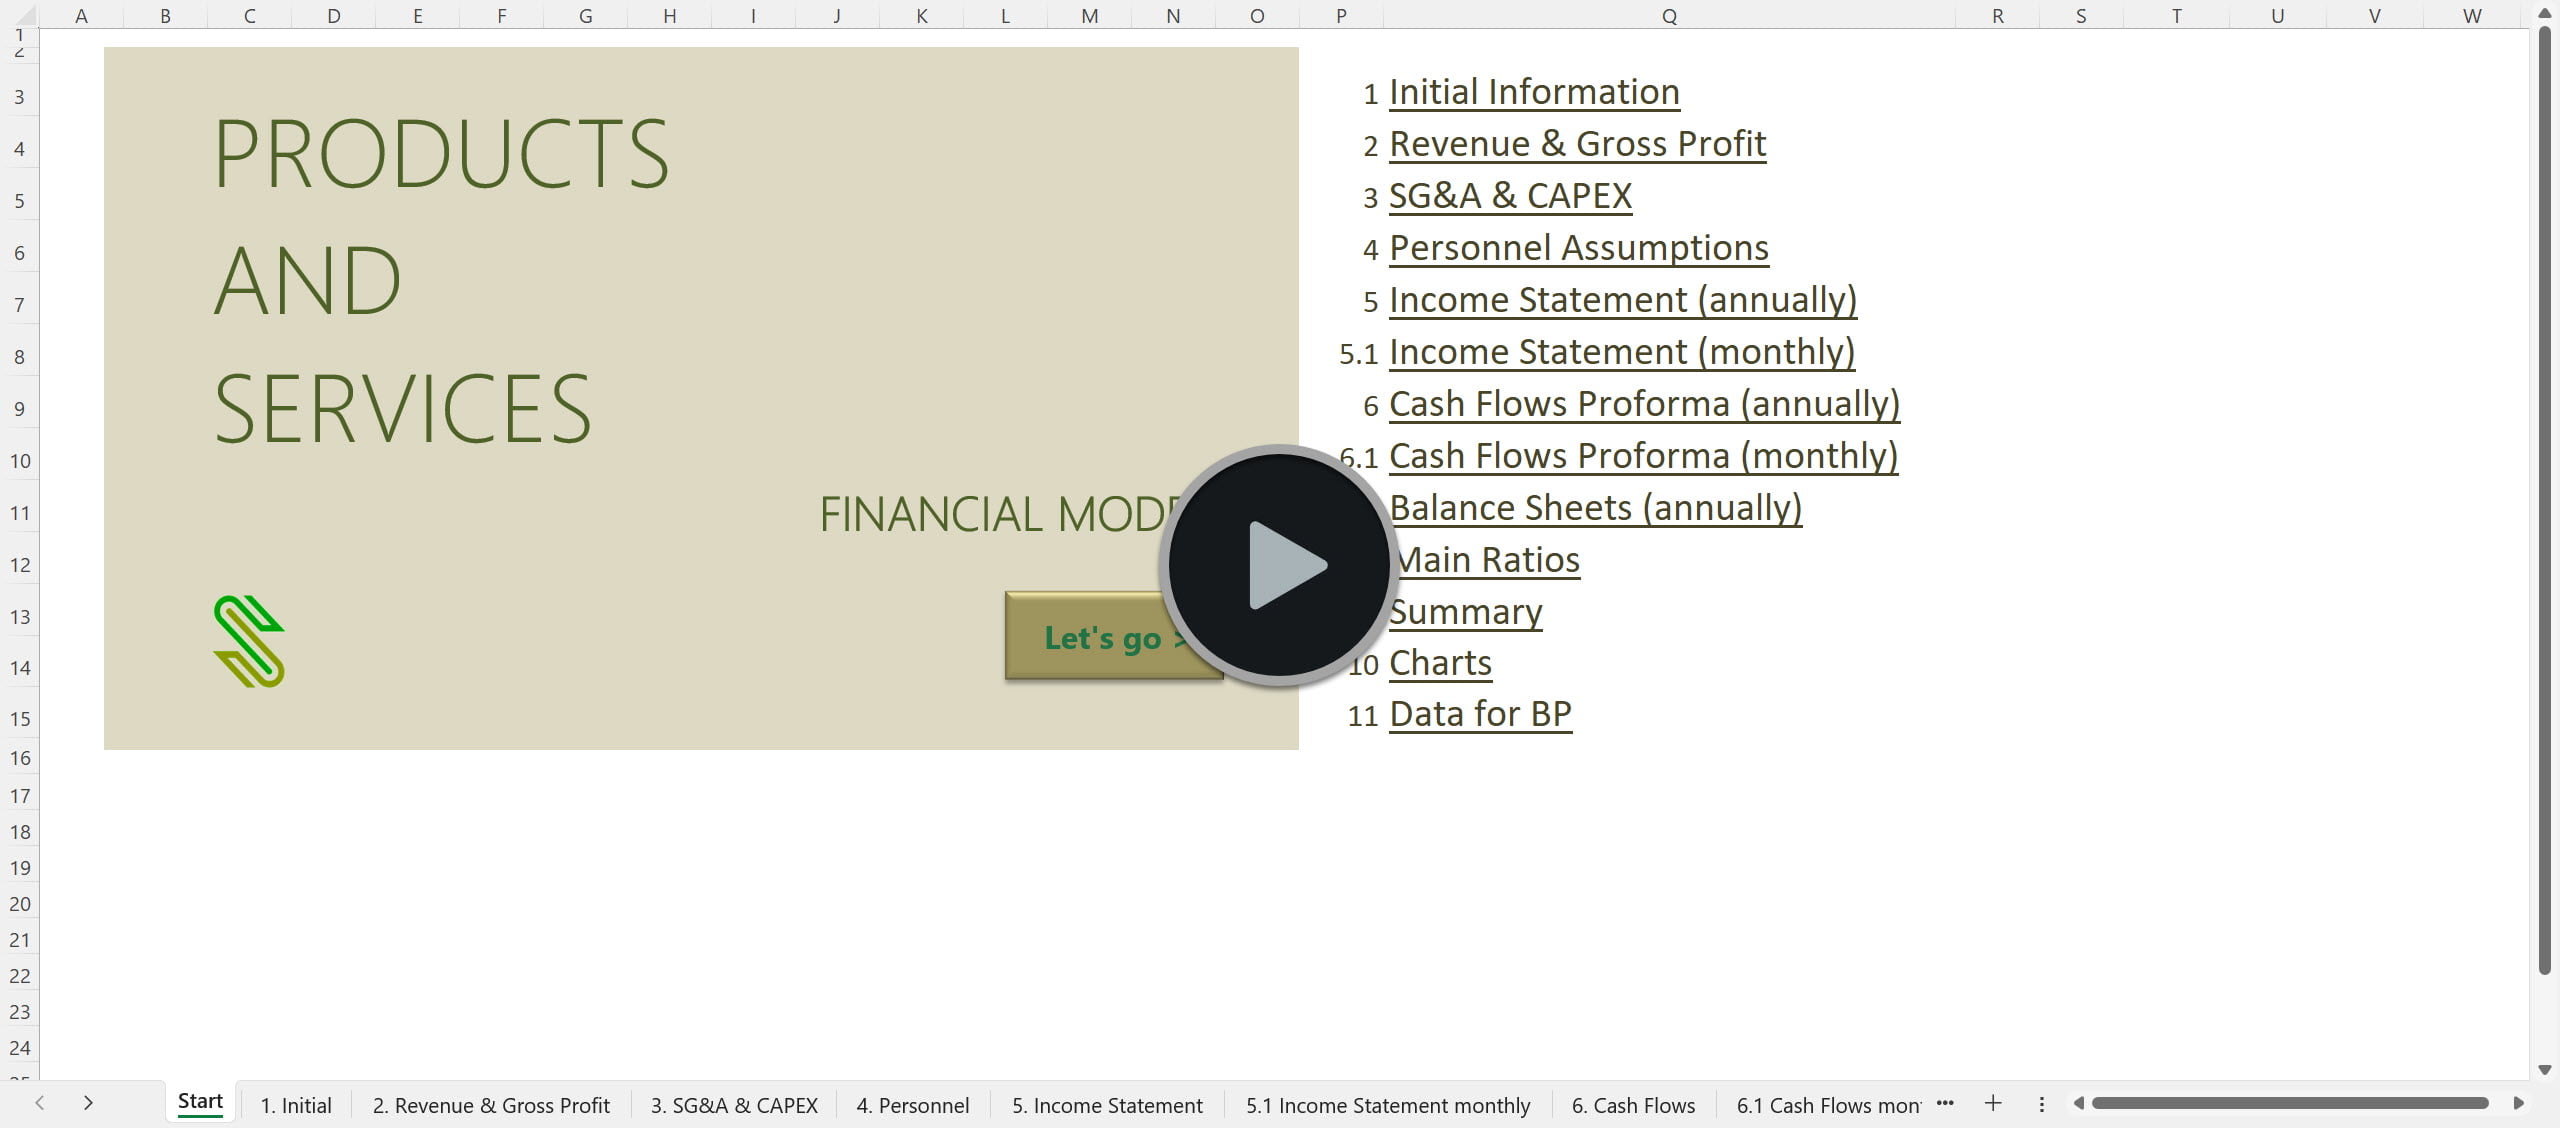 Products and Services Financial Model